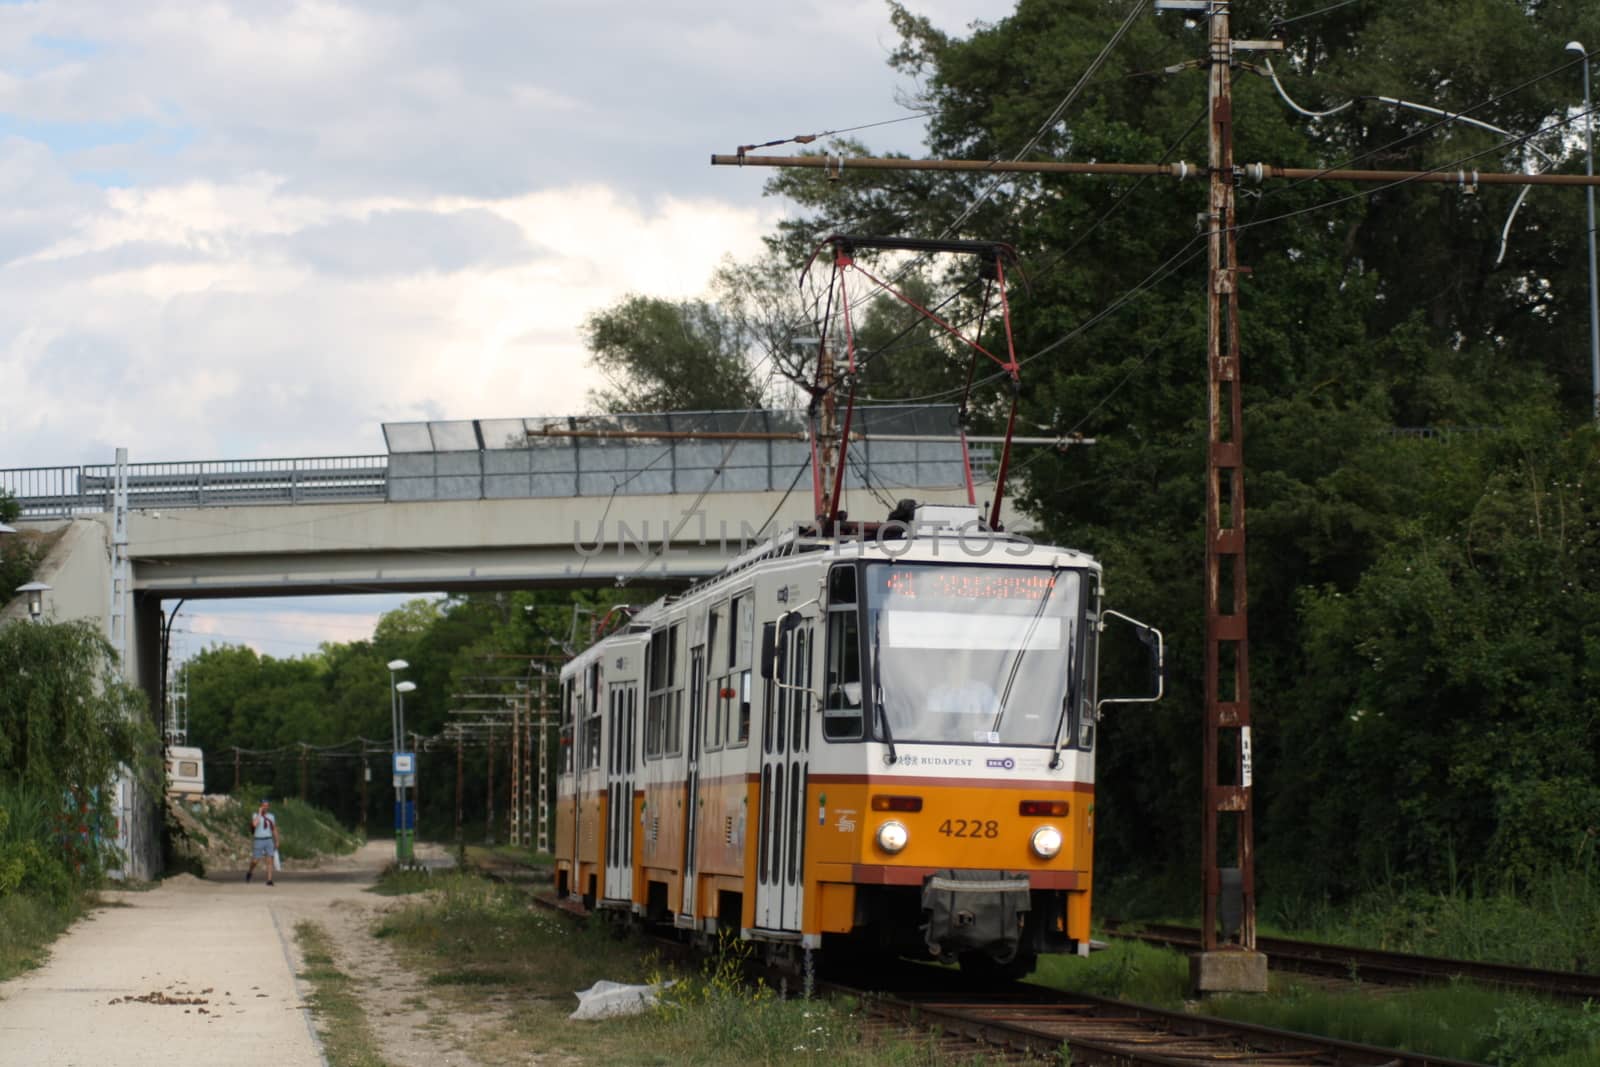  The approaching tram at Budafok in Budapest. High quality photo